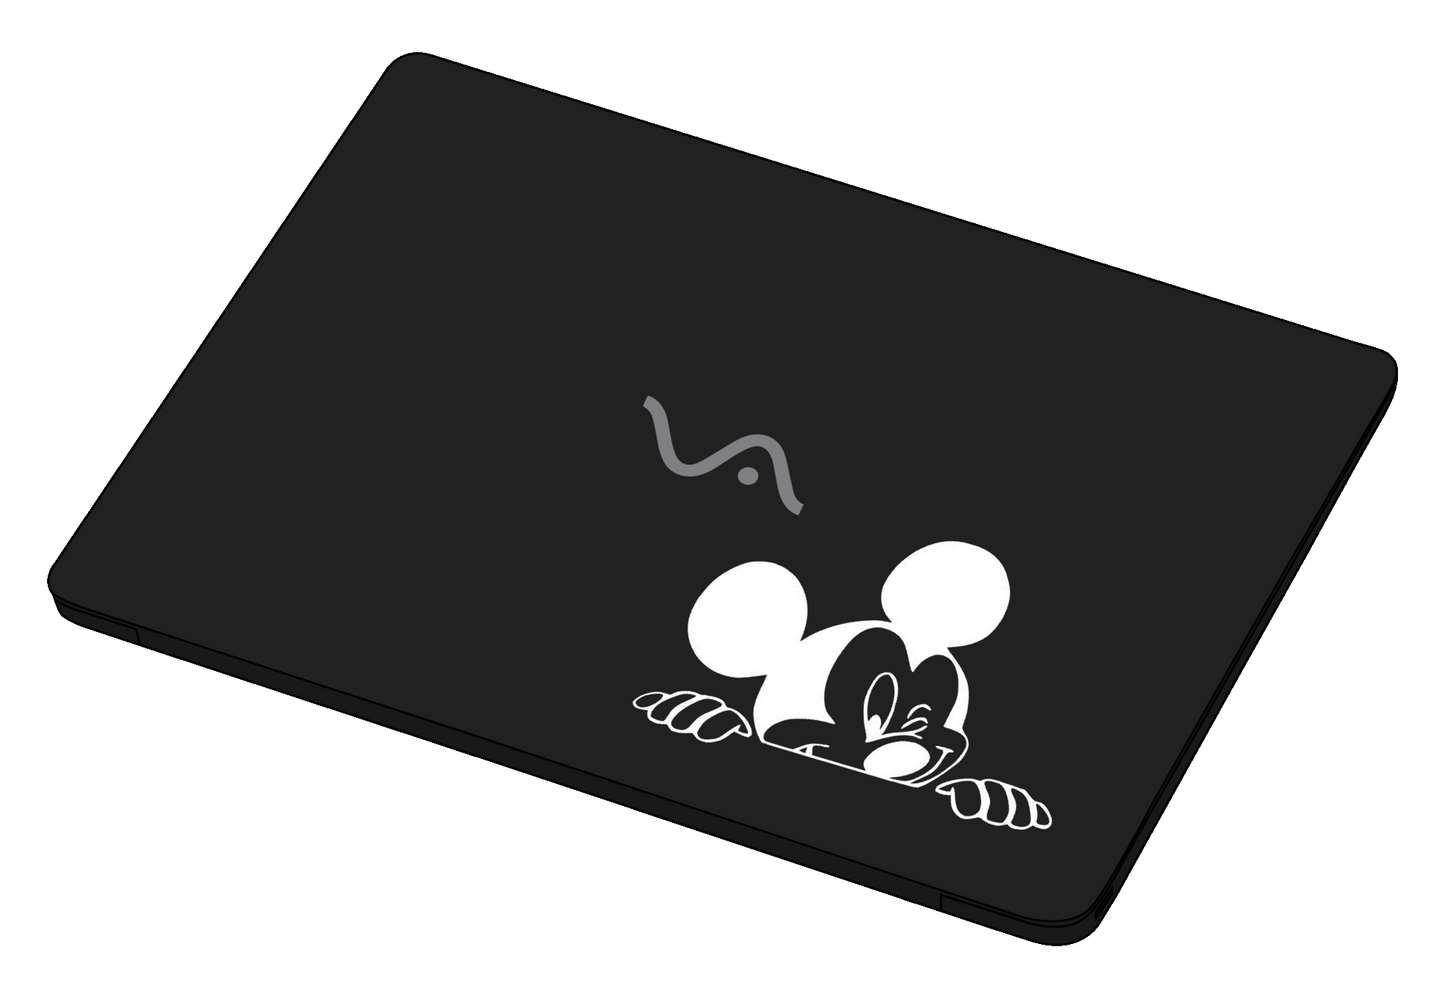 Mickey Mouse sticker-decal-]-Best laptop stickers in Egypt.-sticktop